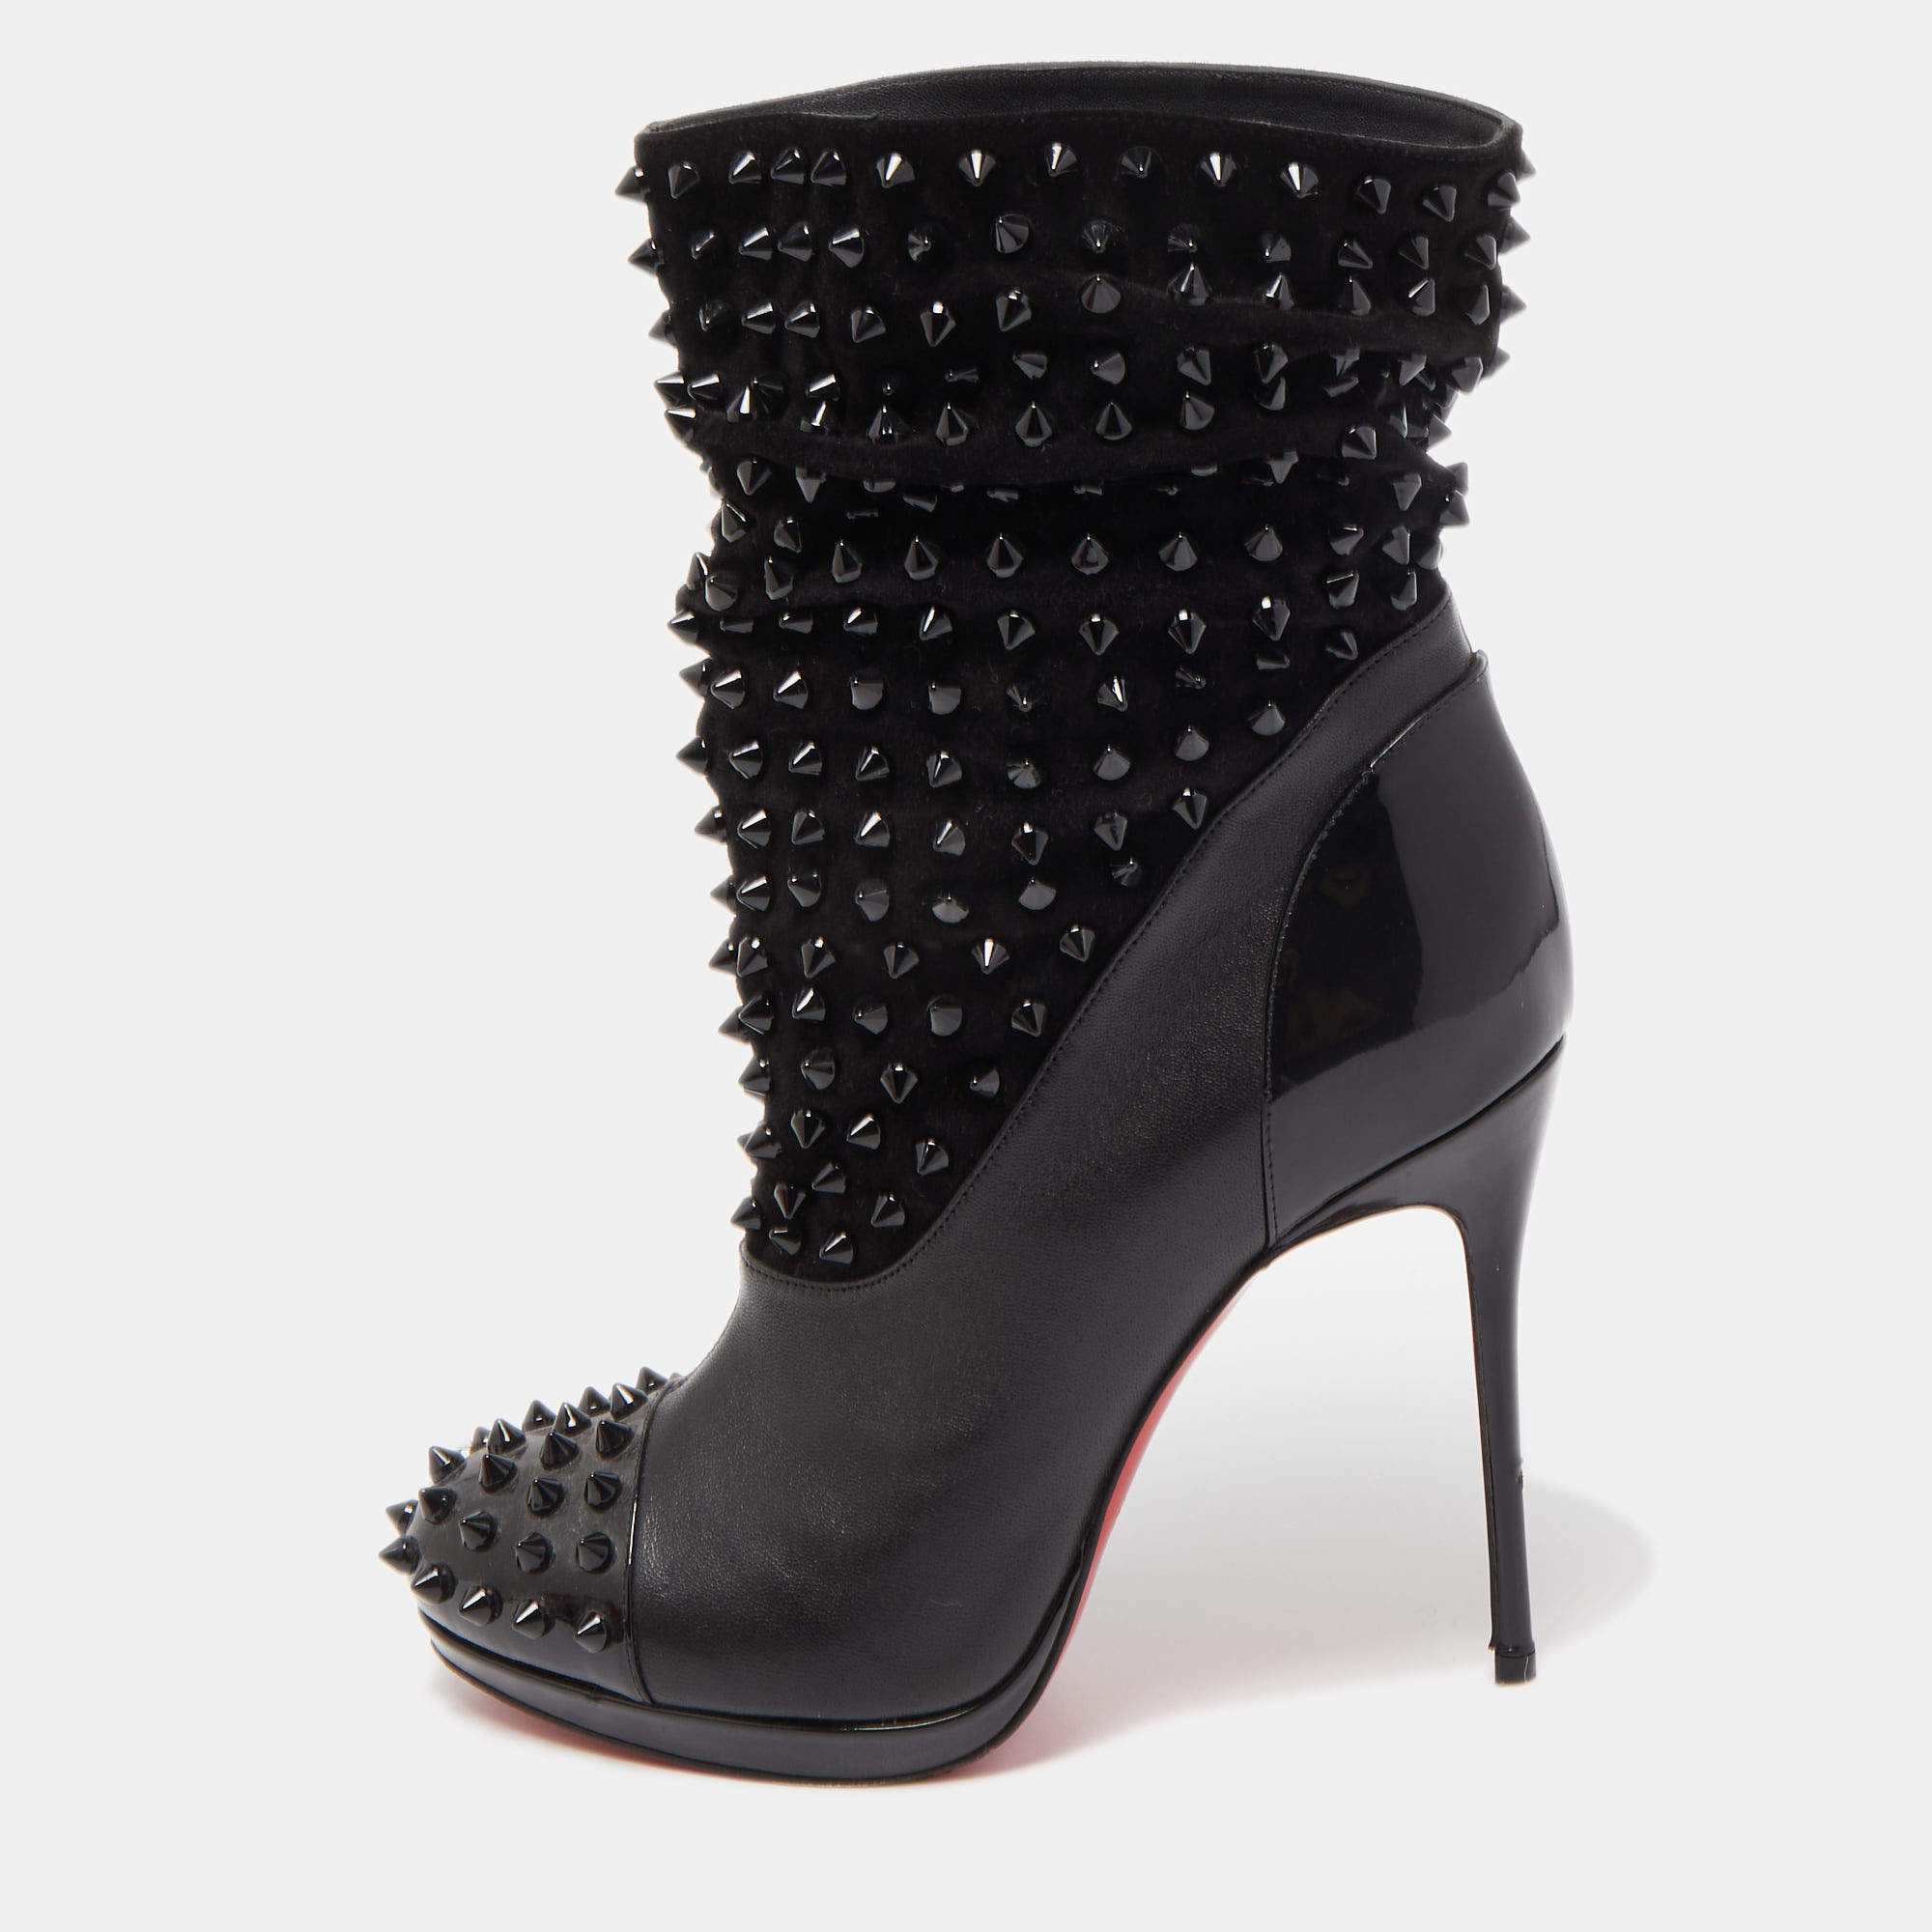 Christian Louboutin Black Patent Leather and Suede Spike Wars Ankle Boots Size 36